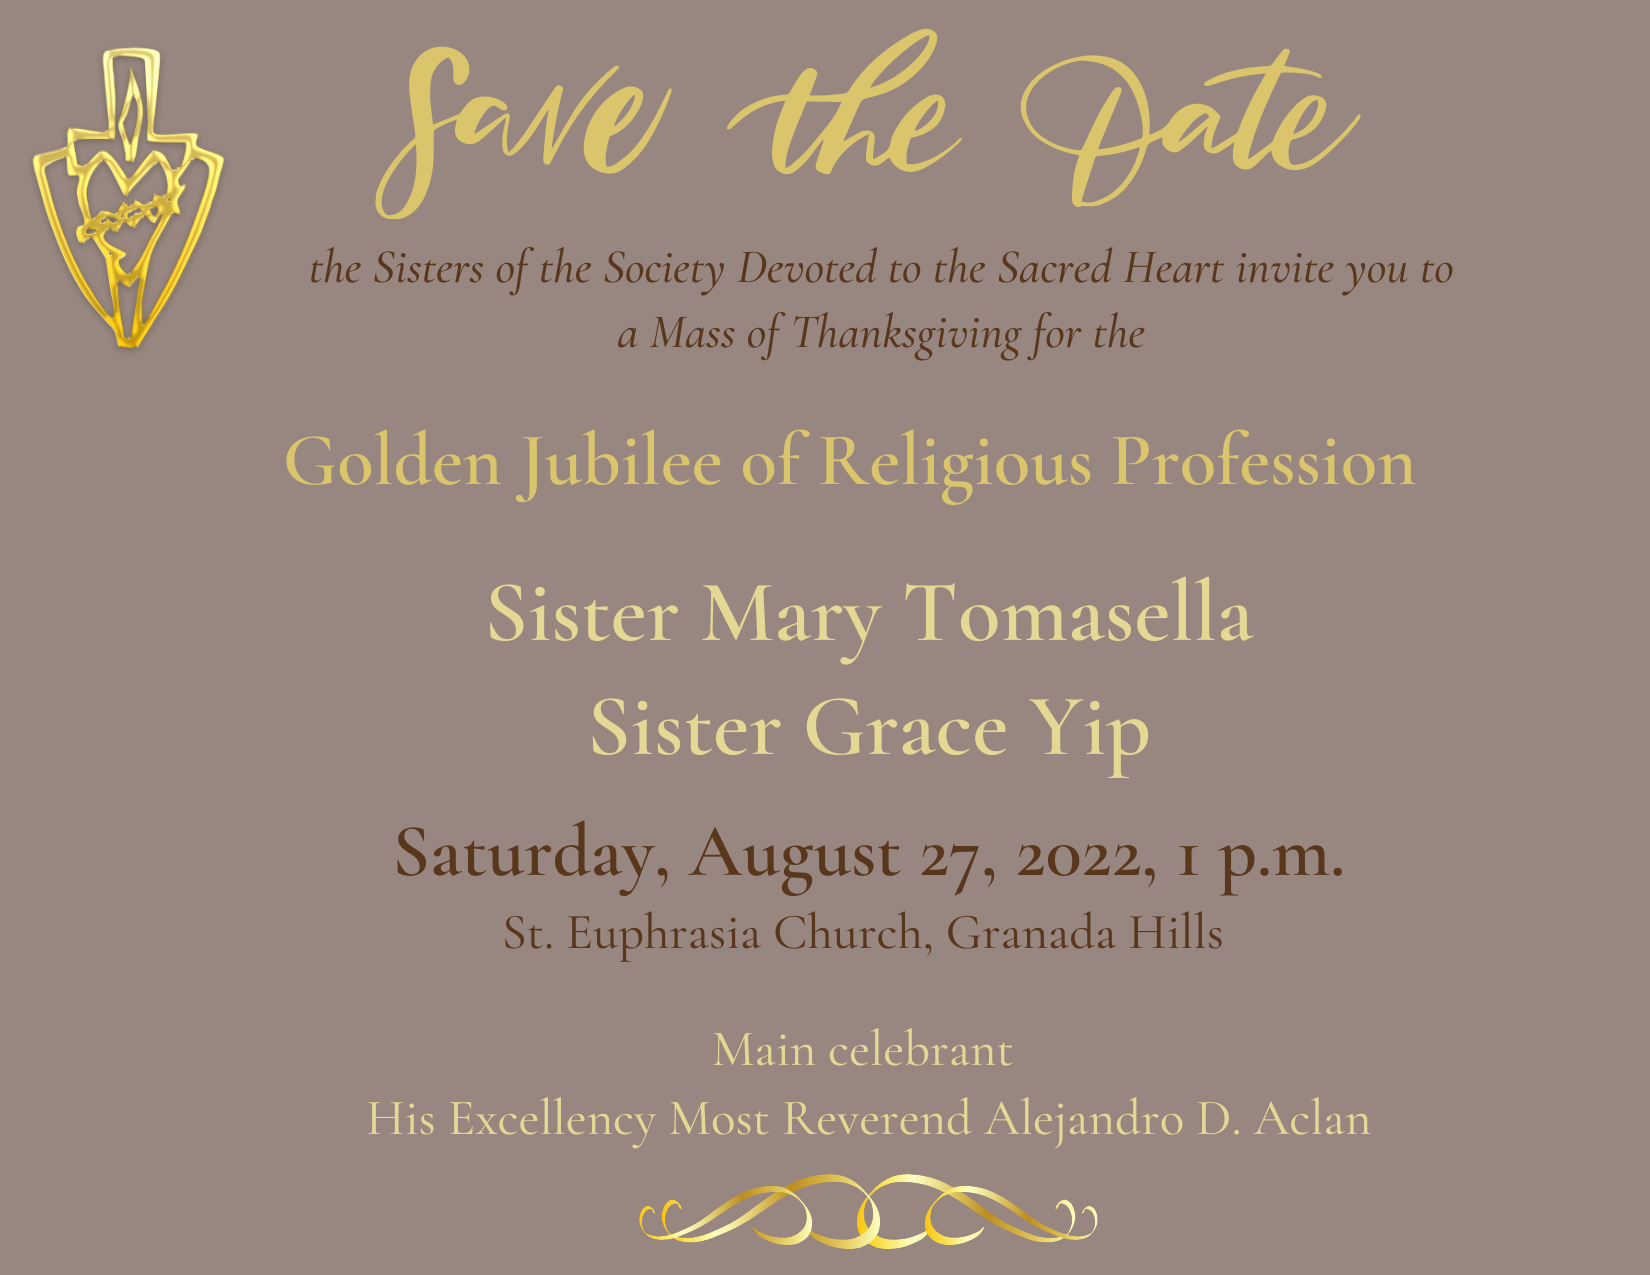 https://sacredheartsisters.com/wp-content/uploads/2022/07/Digital-Save-the-Date-2.png